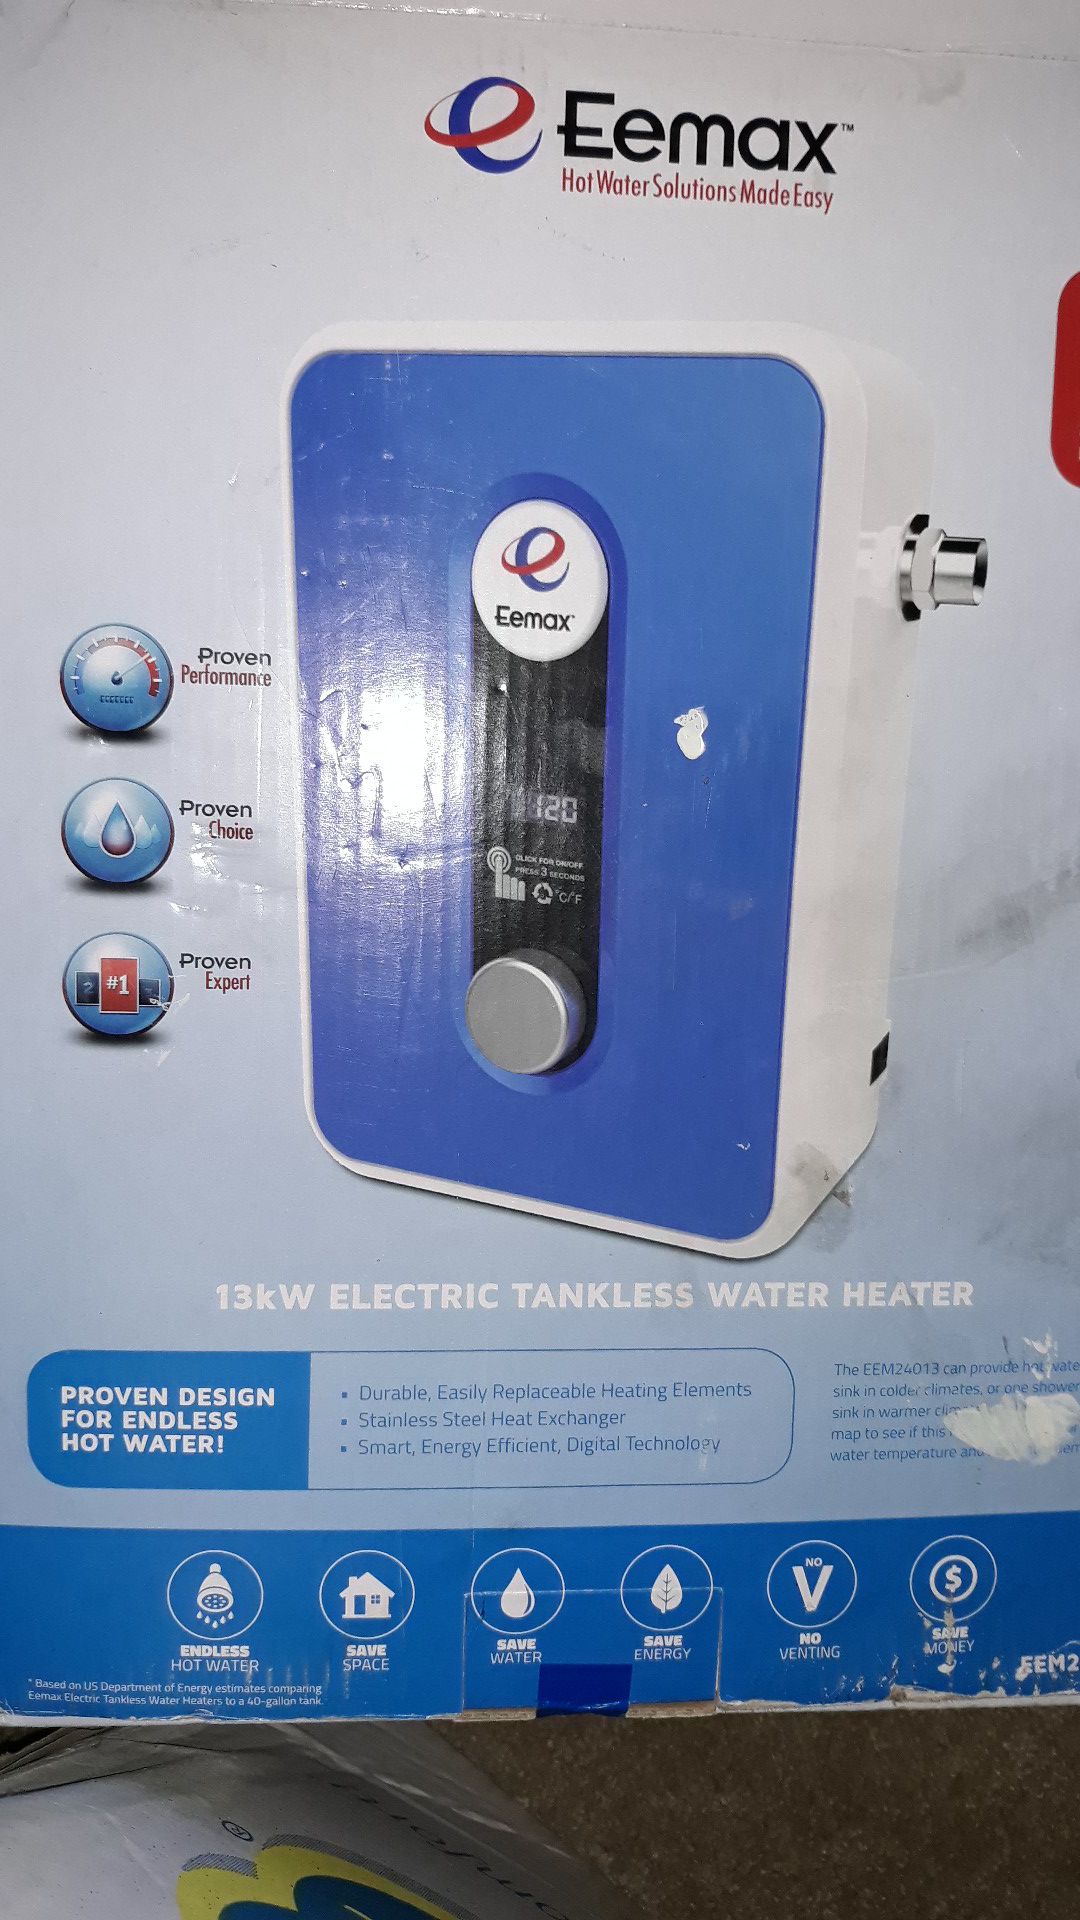 Brand new Eemax 13kW electric tankless water heater